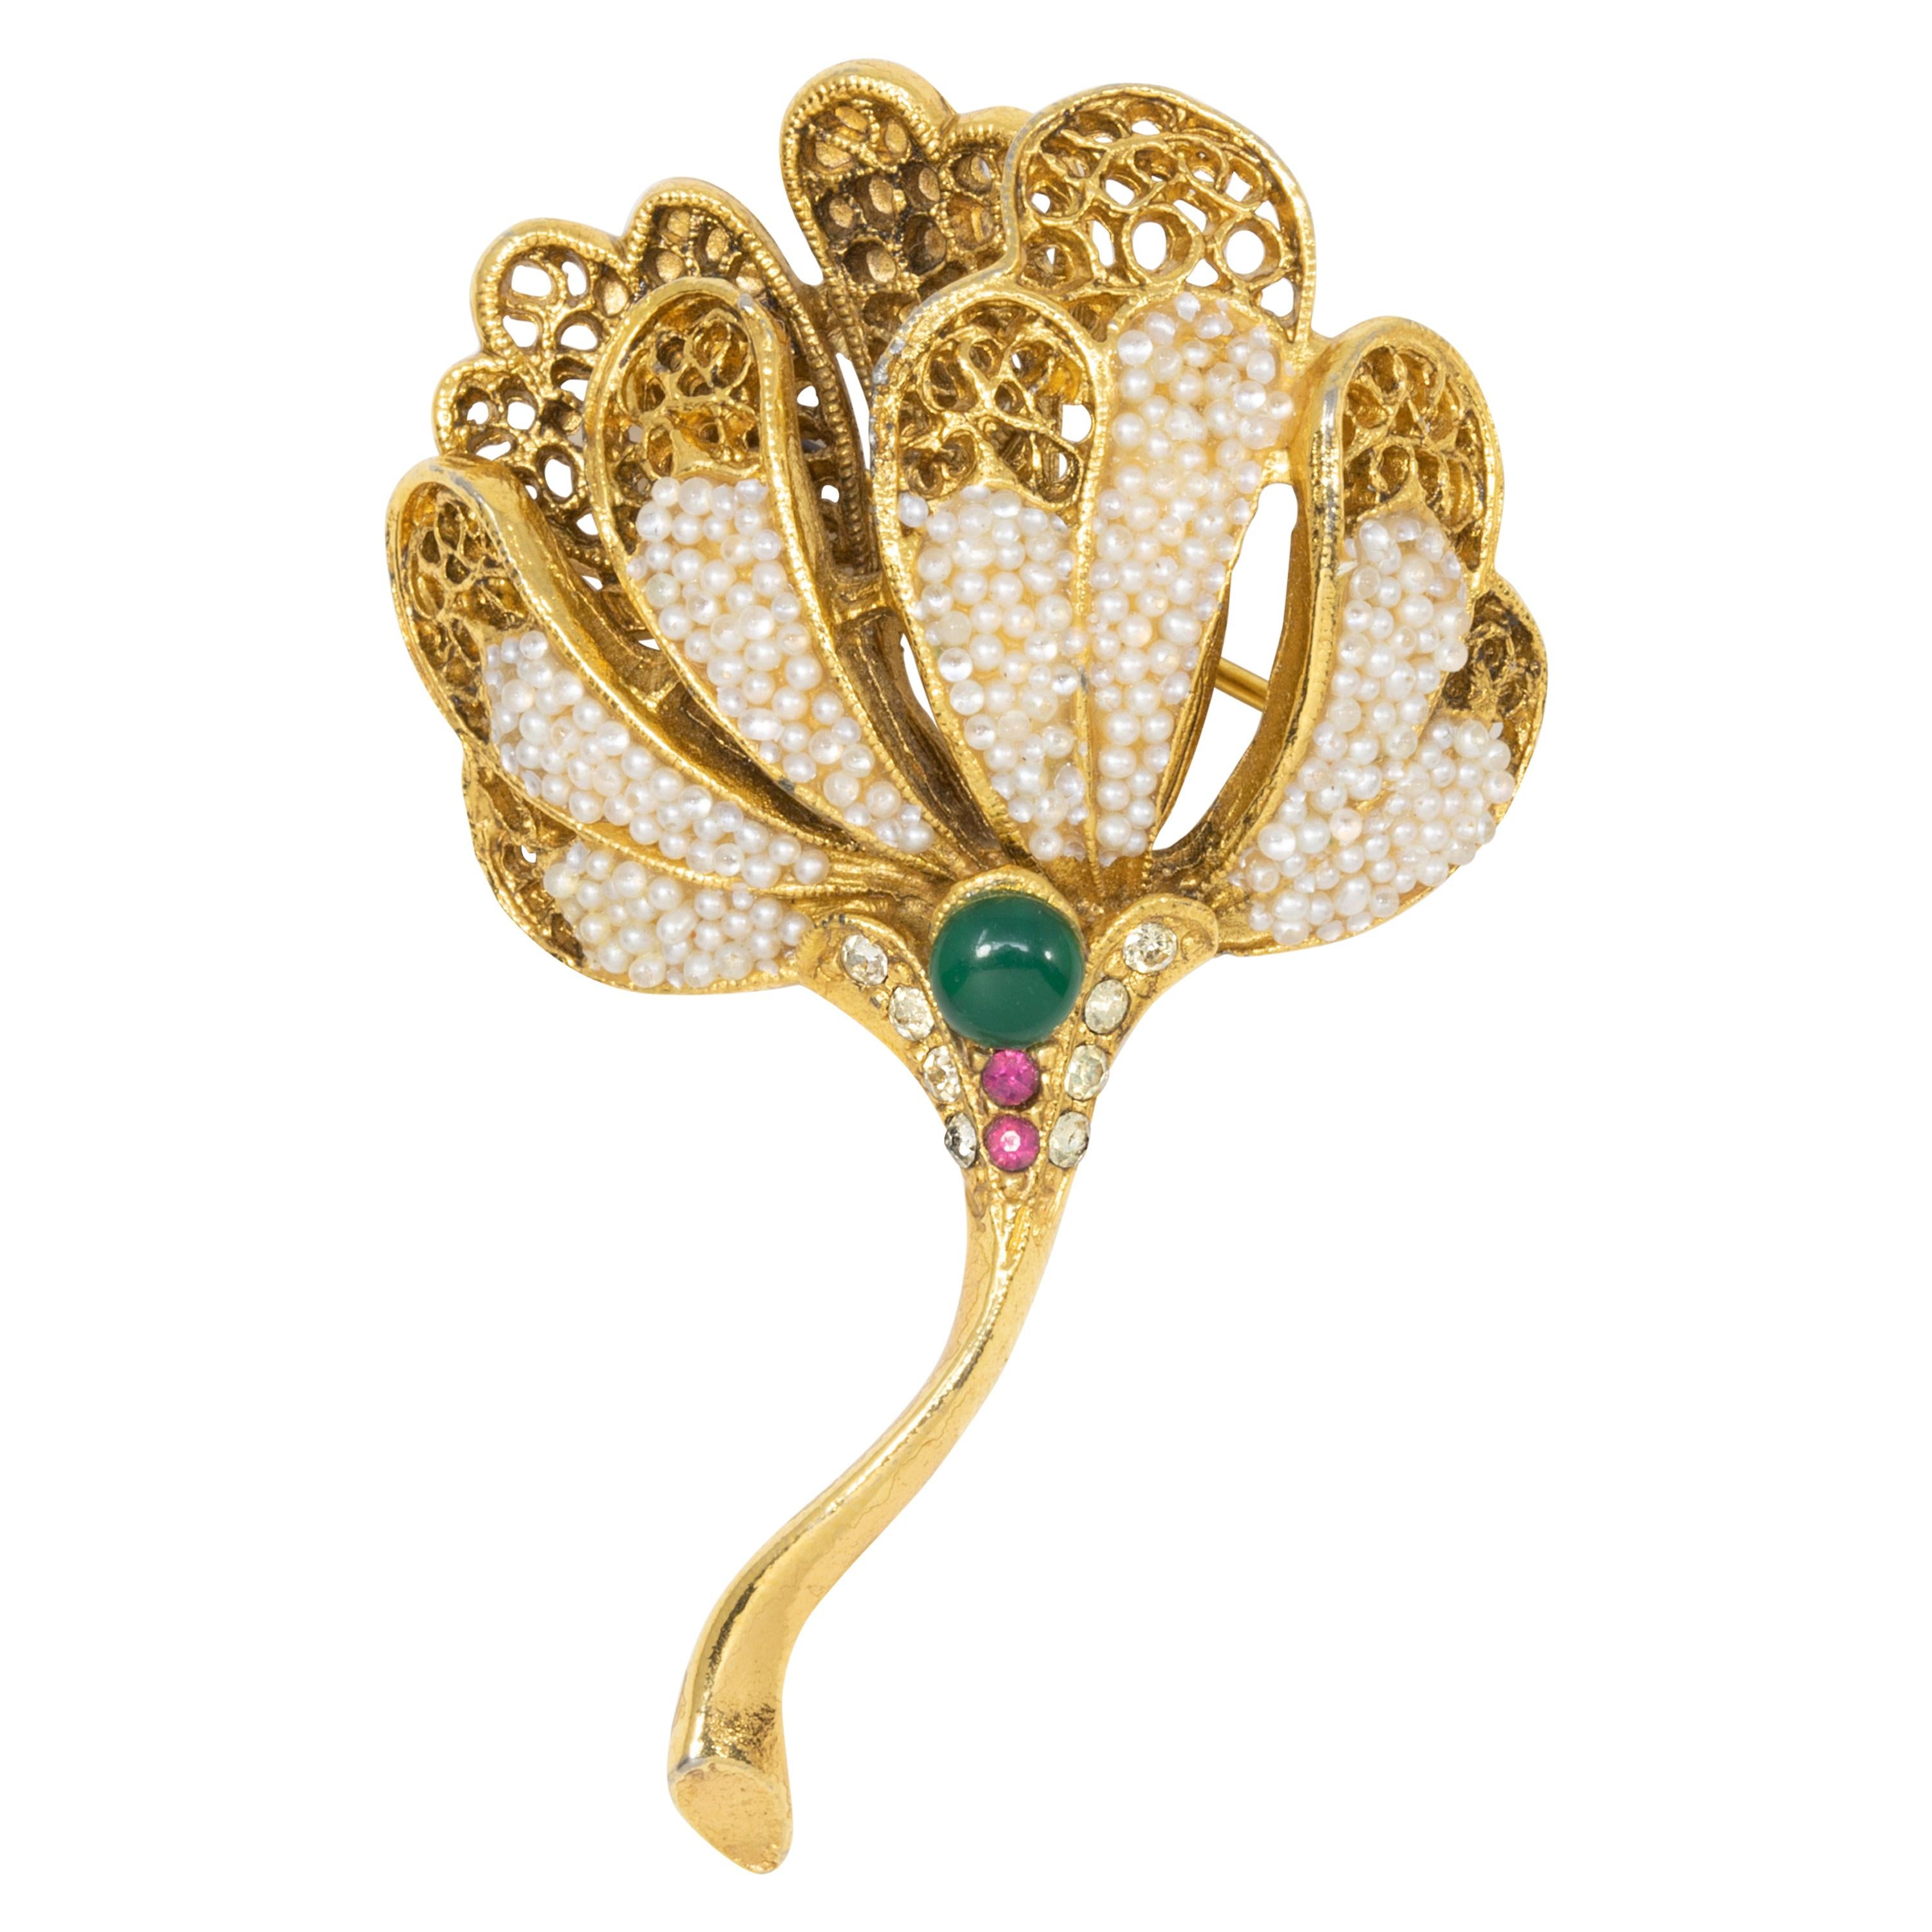 BSK Bead Encrusted Filigree Flower Pin with Emerald Cabochon and Rose Crystals